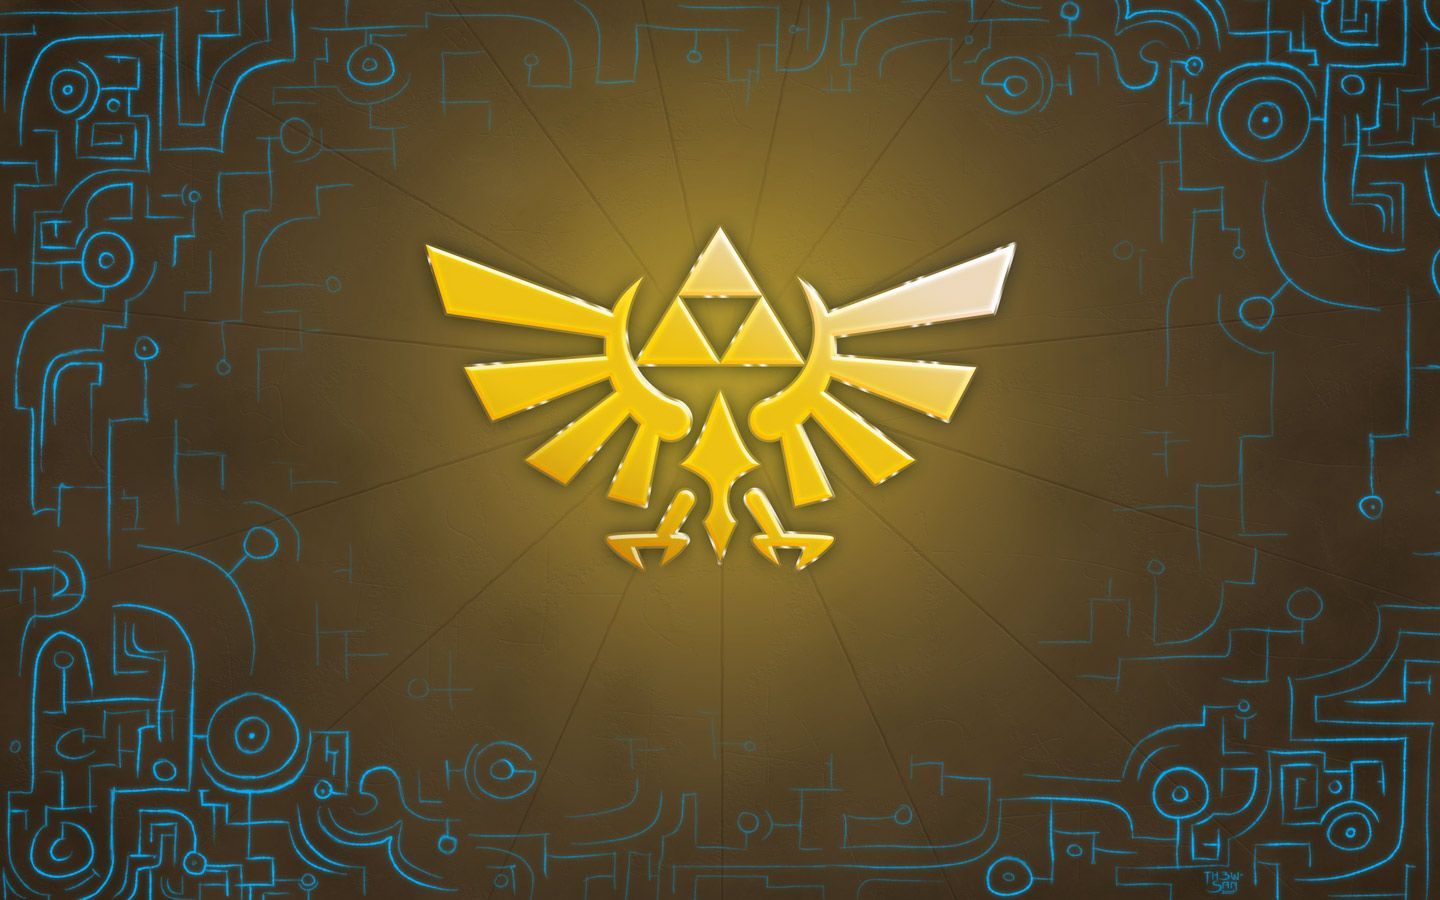 Zelda HD Wallpapers and Backgrounds